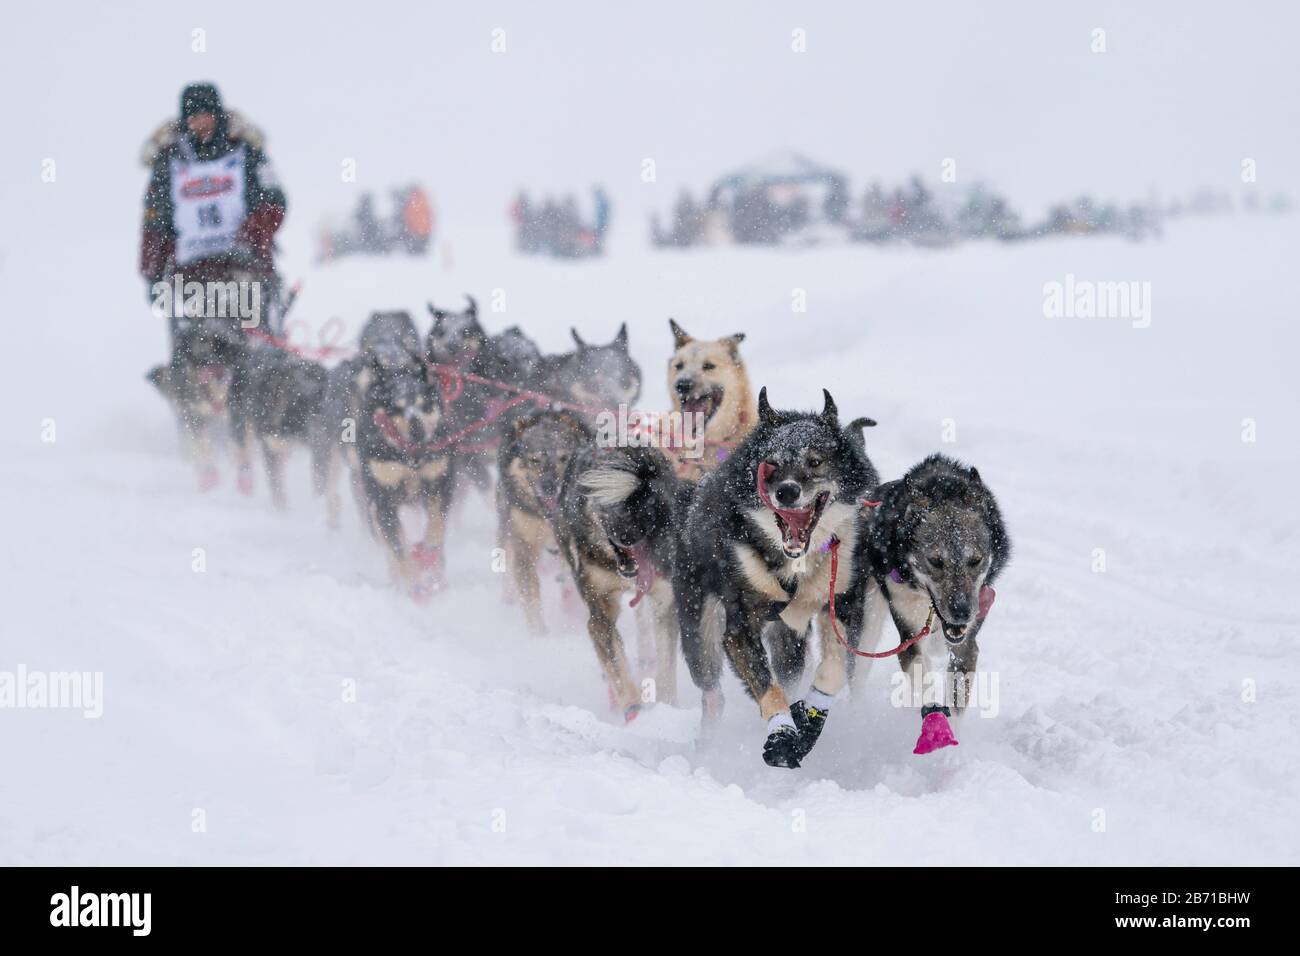 Musher Richie Diehl competing in the 48th Iditarod Trail Sled Dog Race in Southcentral Alaska. Stock Photo